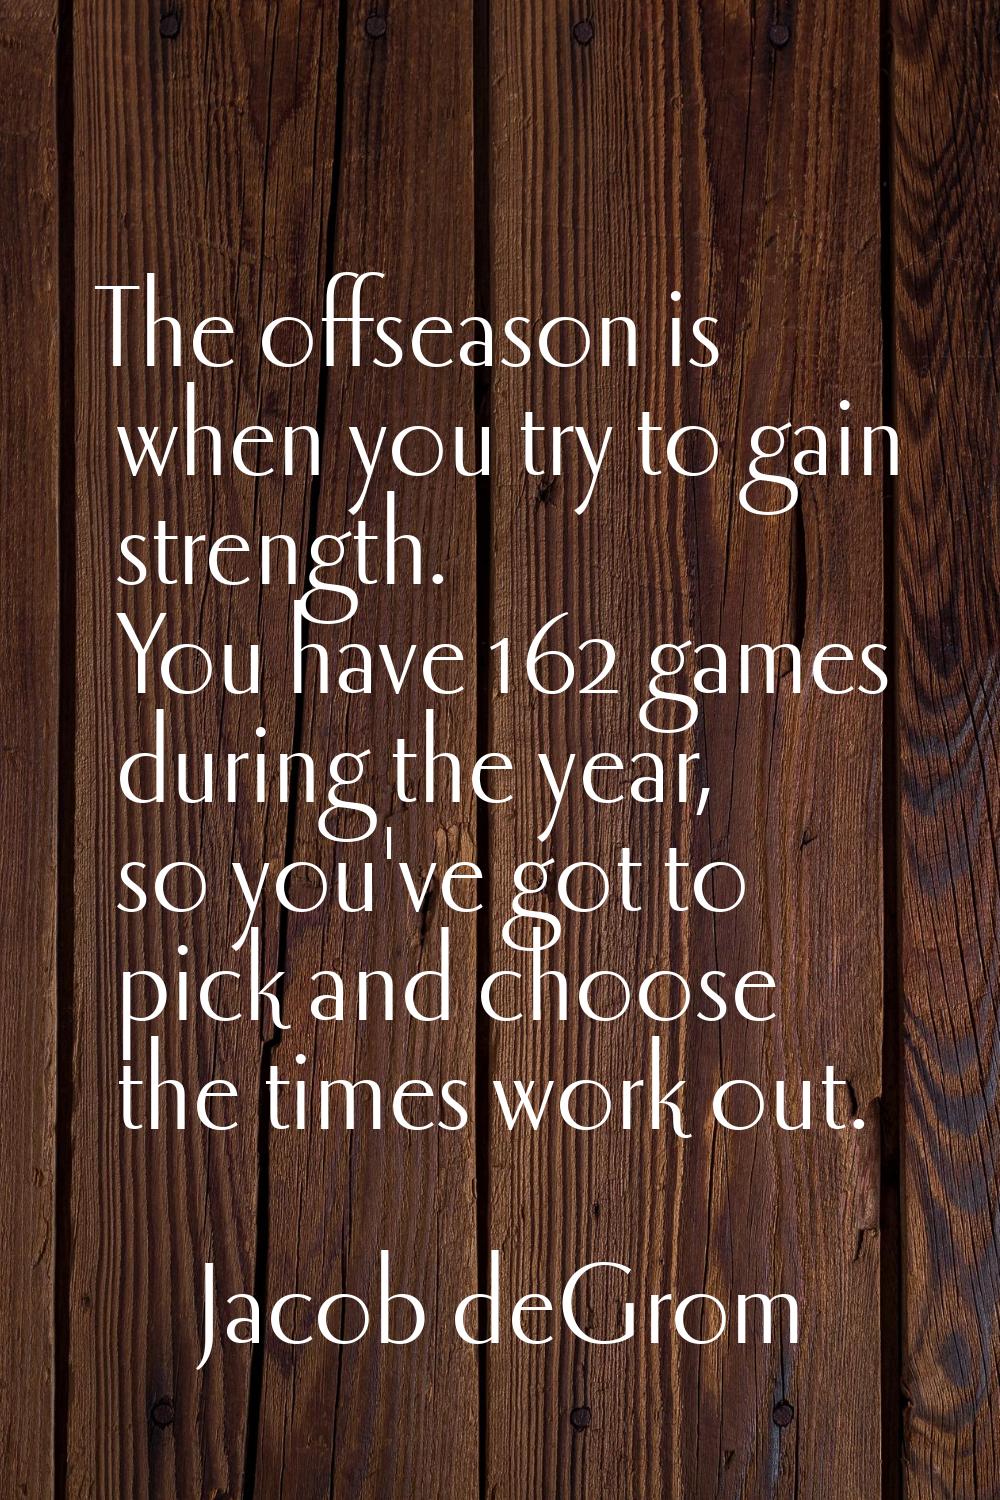 The offseason is when you try to gain strength. You have 162 games during the year, so you've got t